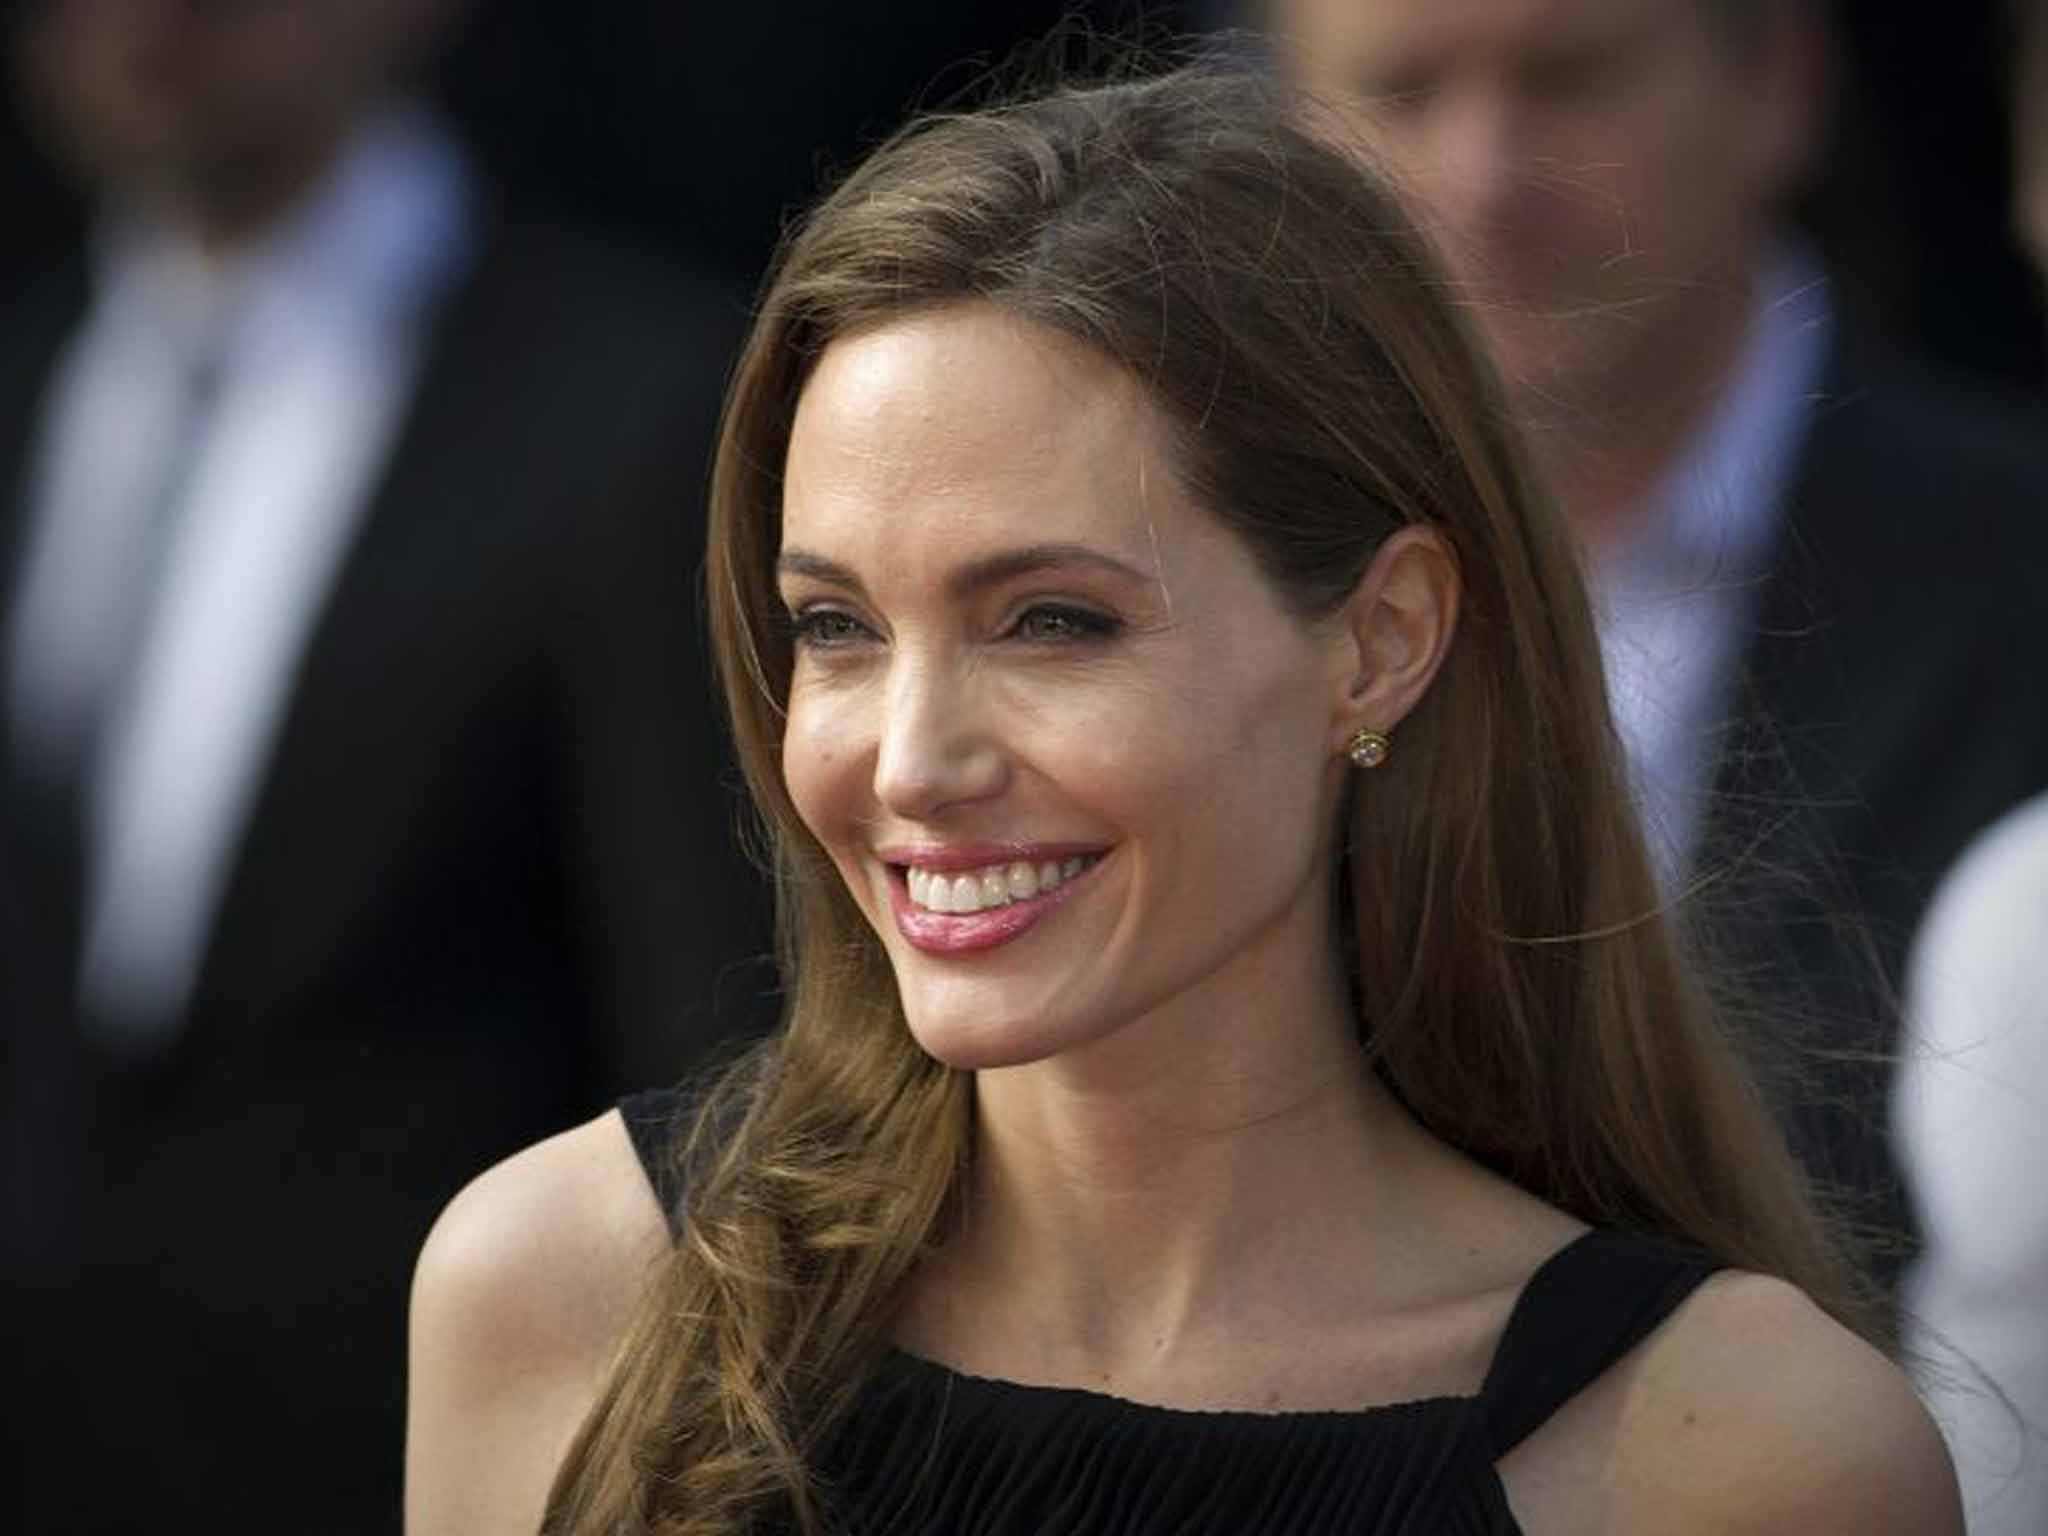 The Devil in Miss Angelina Jolie